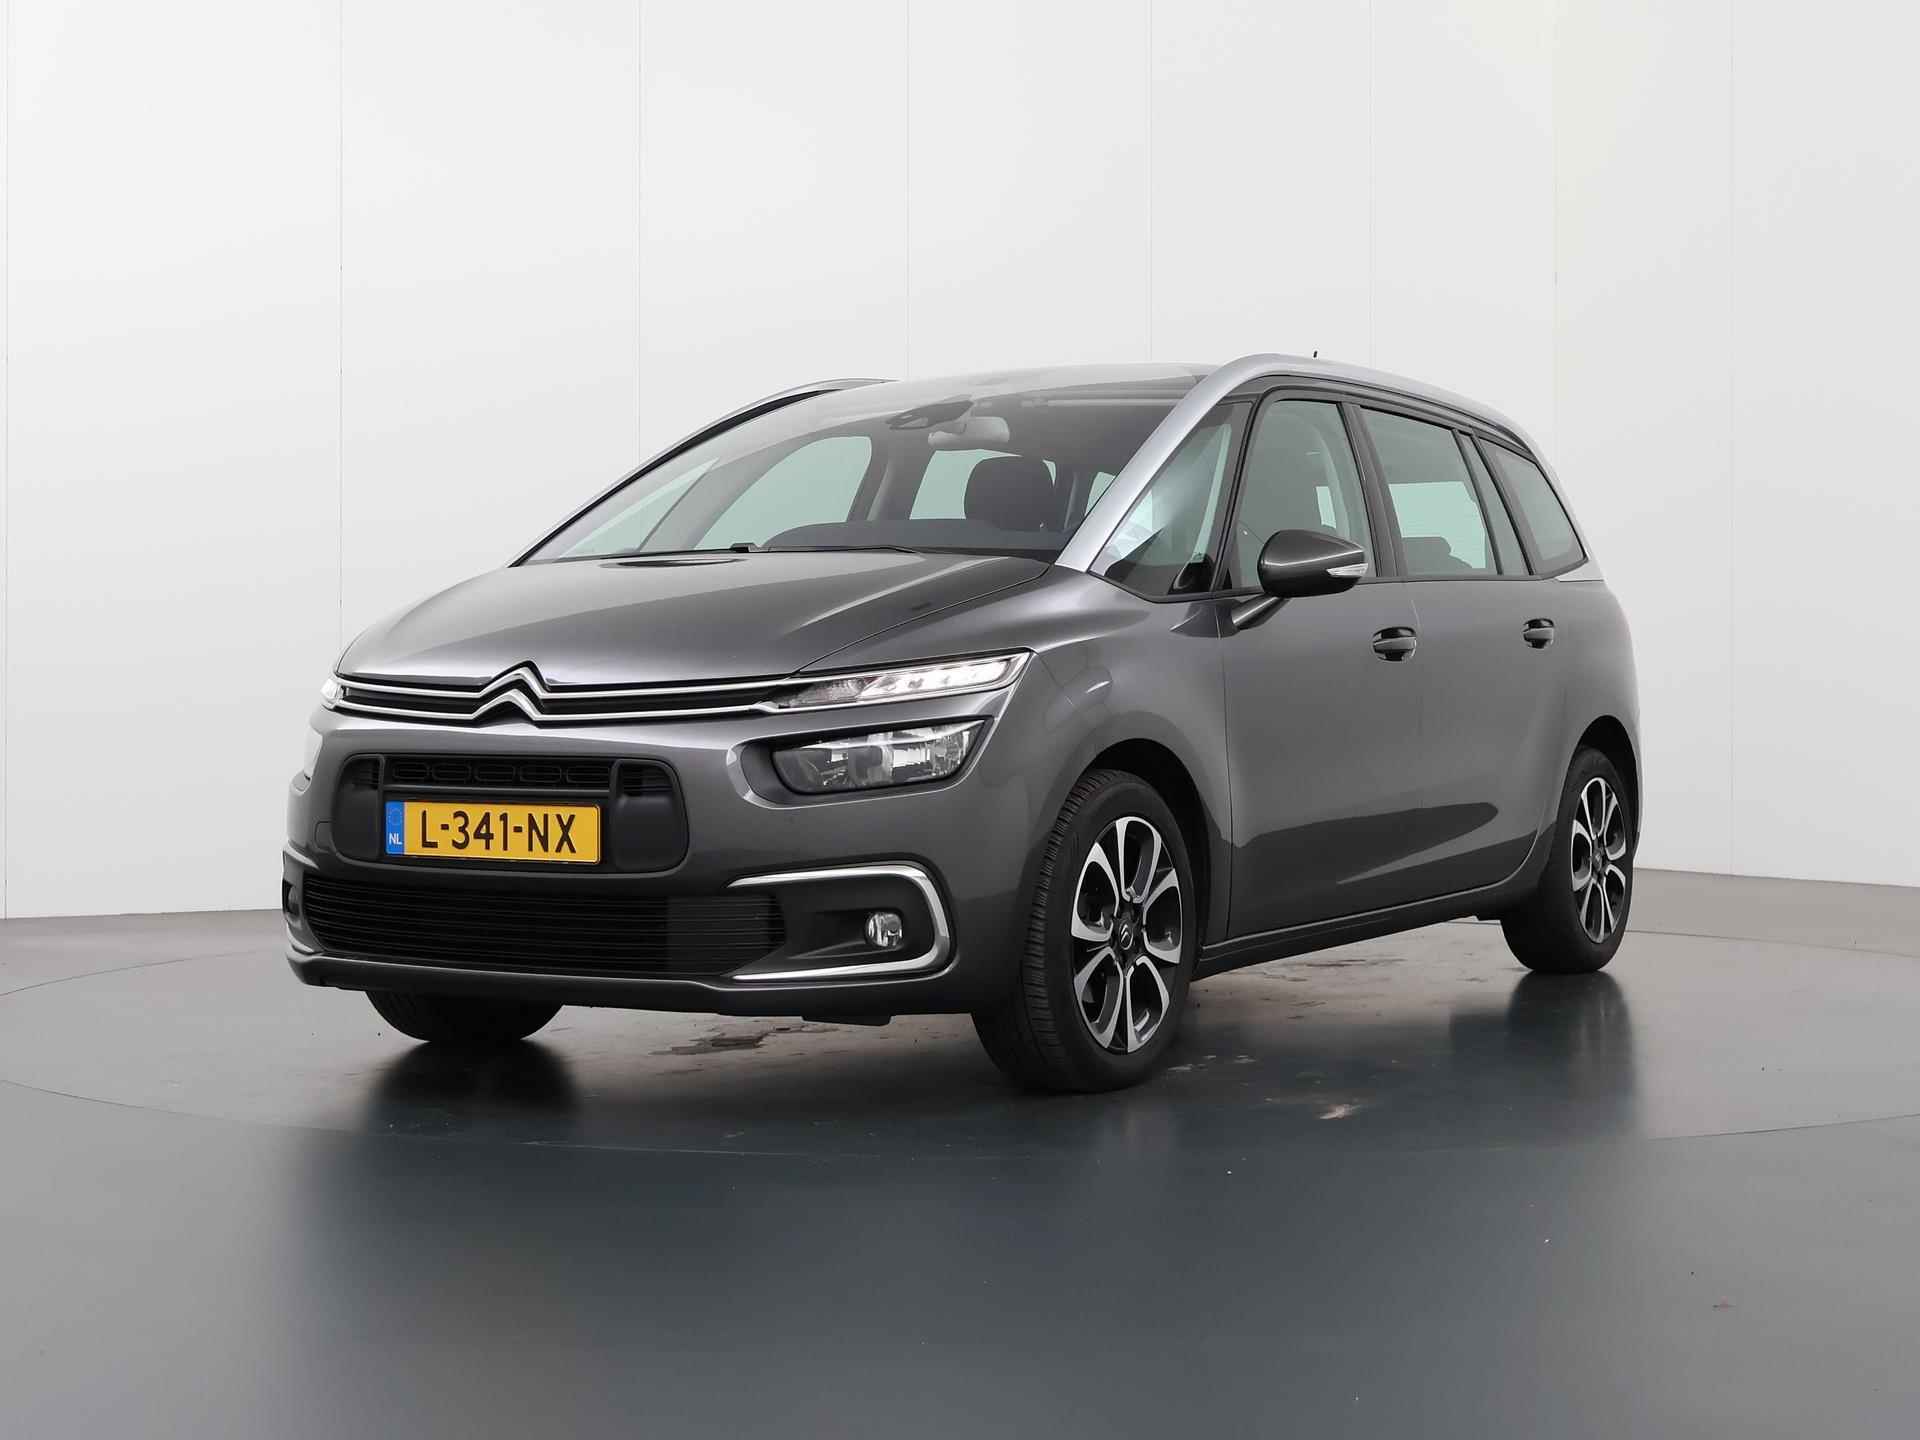 Citroen Grand C4 SpaceTourer 1.2 PureTech Business | 7 Persoons | Automaat | Navigatiesysteem | Achteruitrijcamera | Cruise Control | Climate Control | Apple Carplay/Android Auto | - 36/36